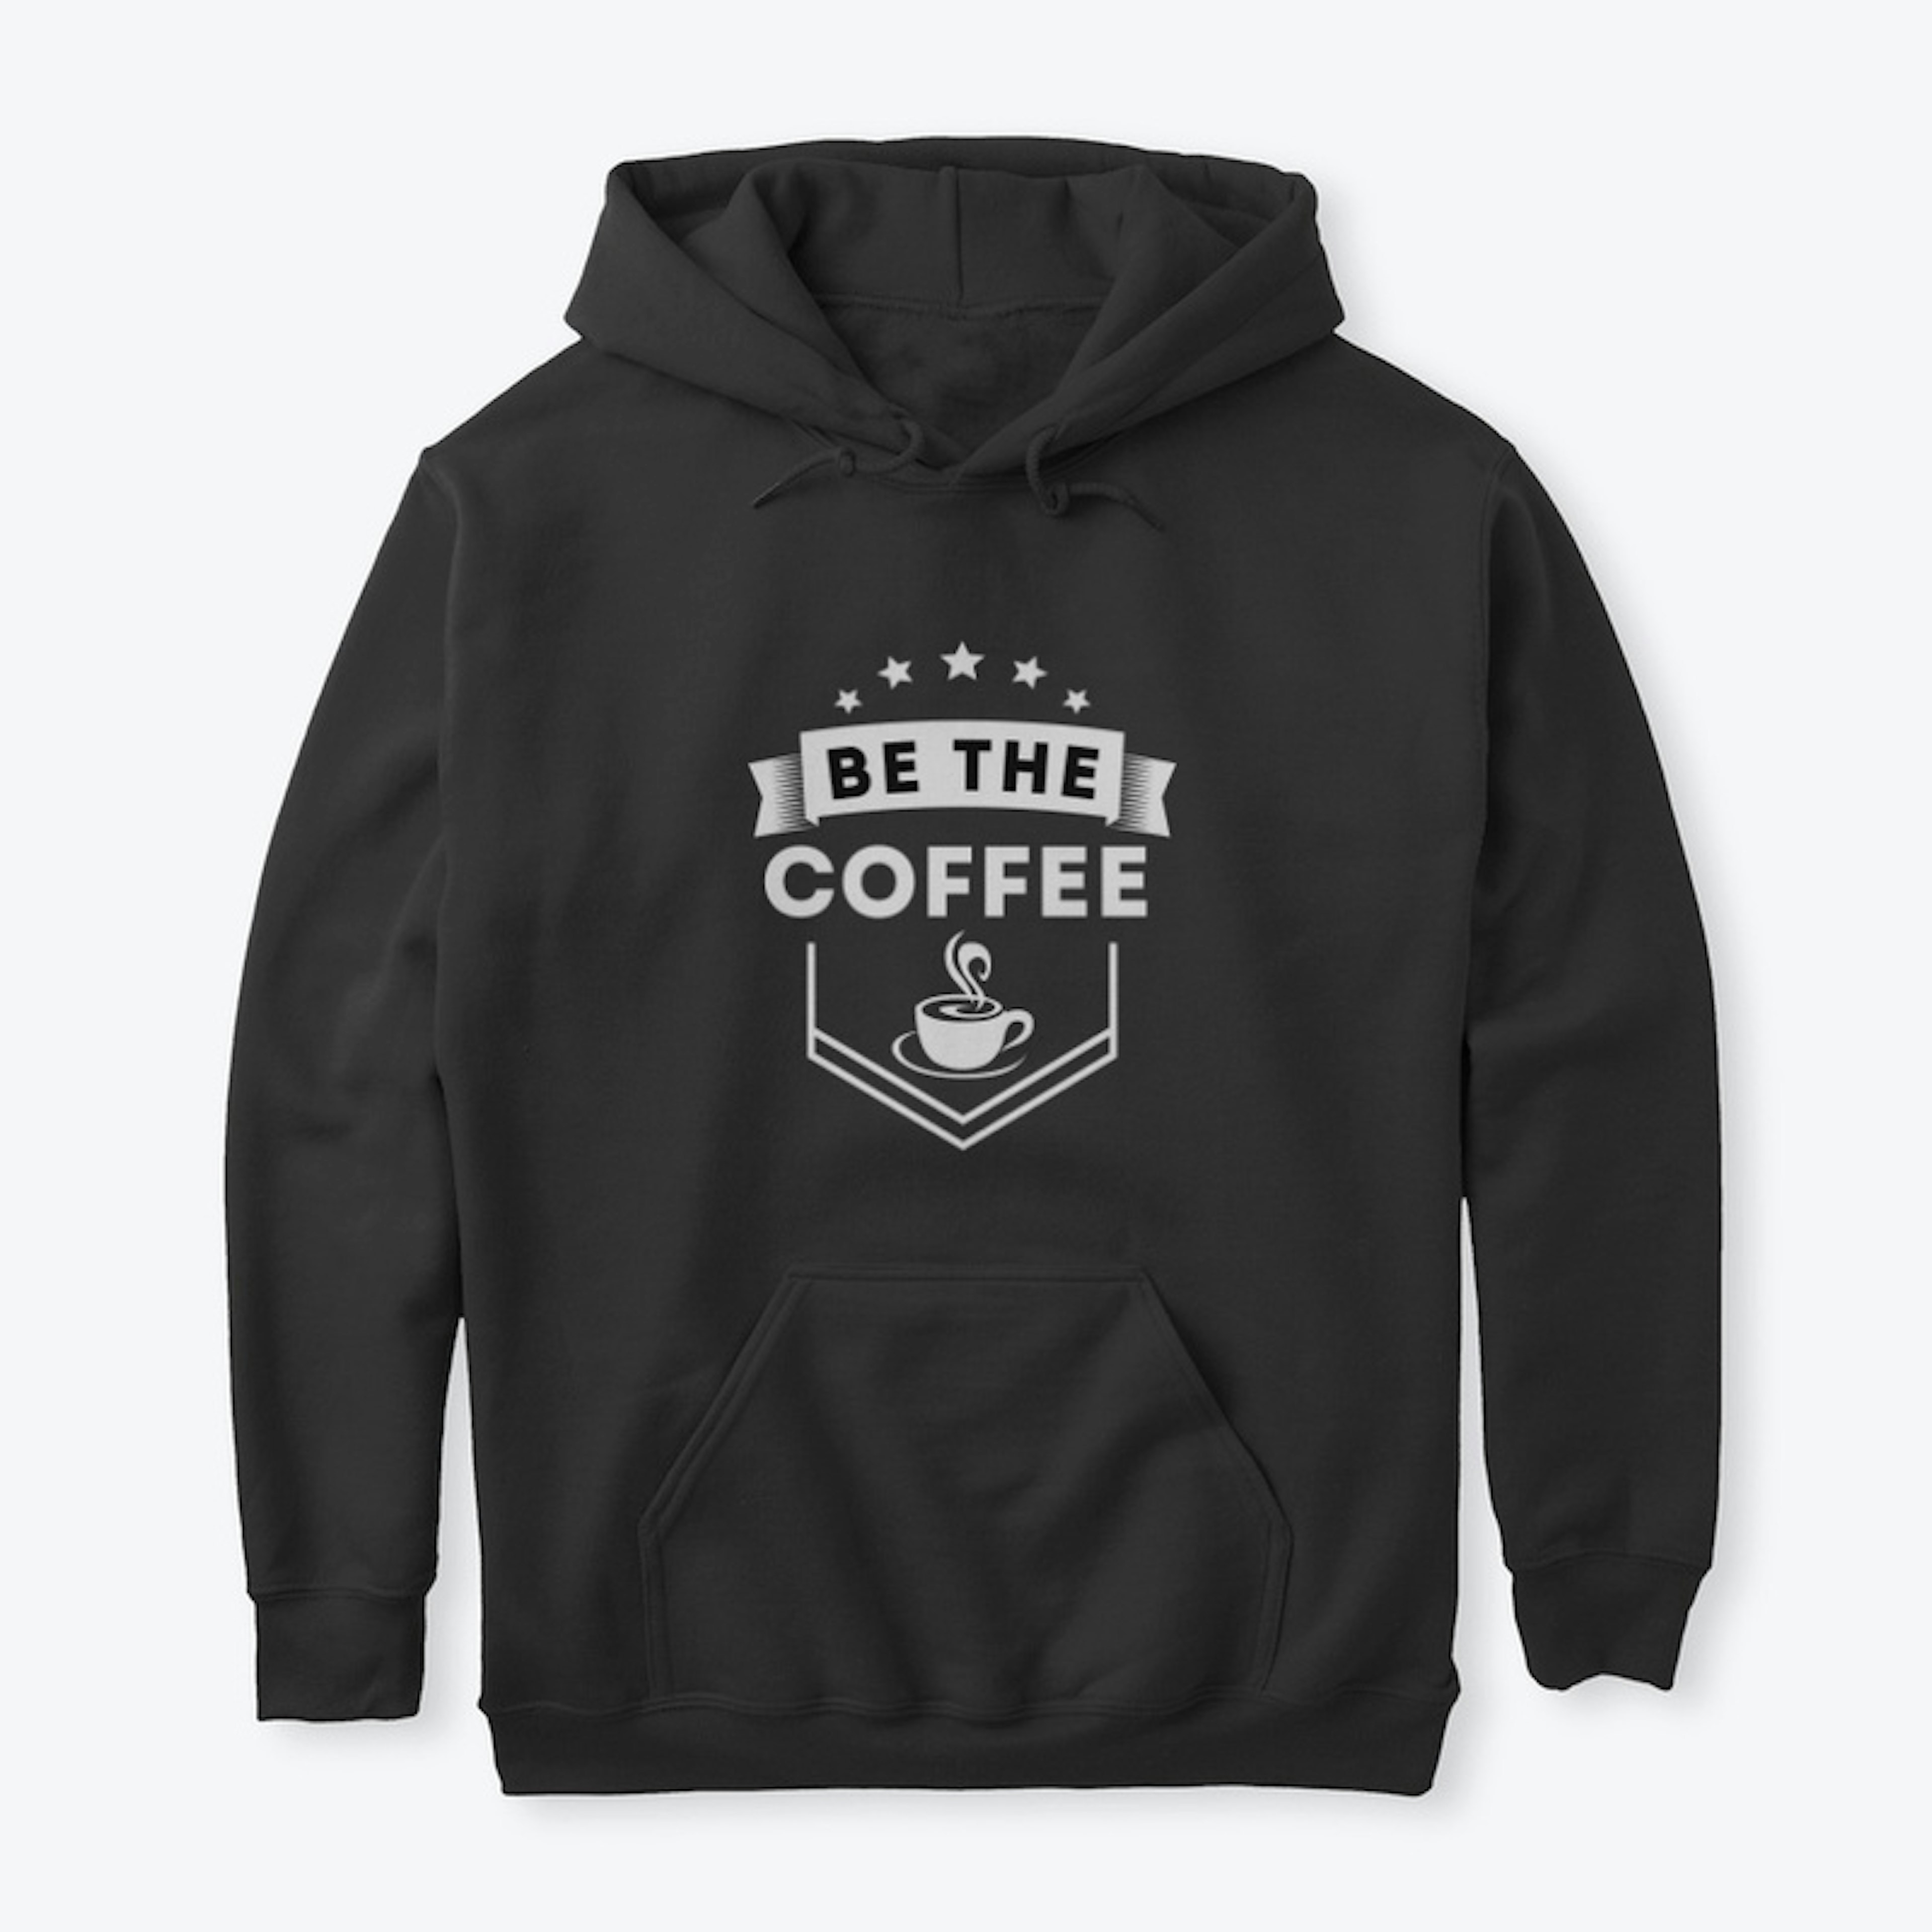 Be the Coffee